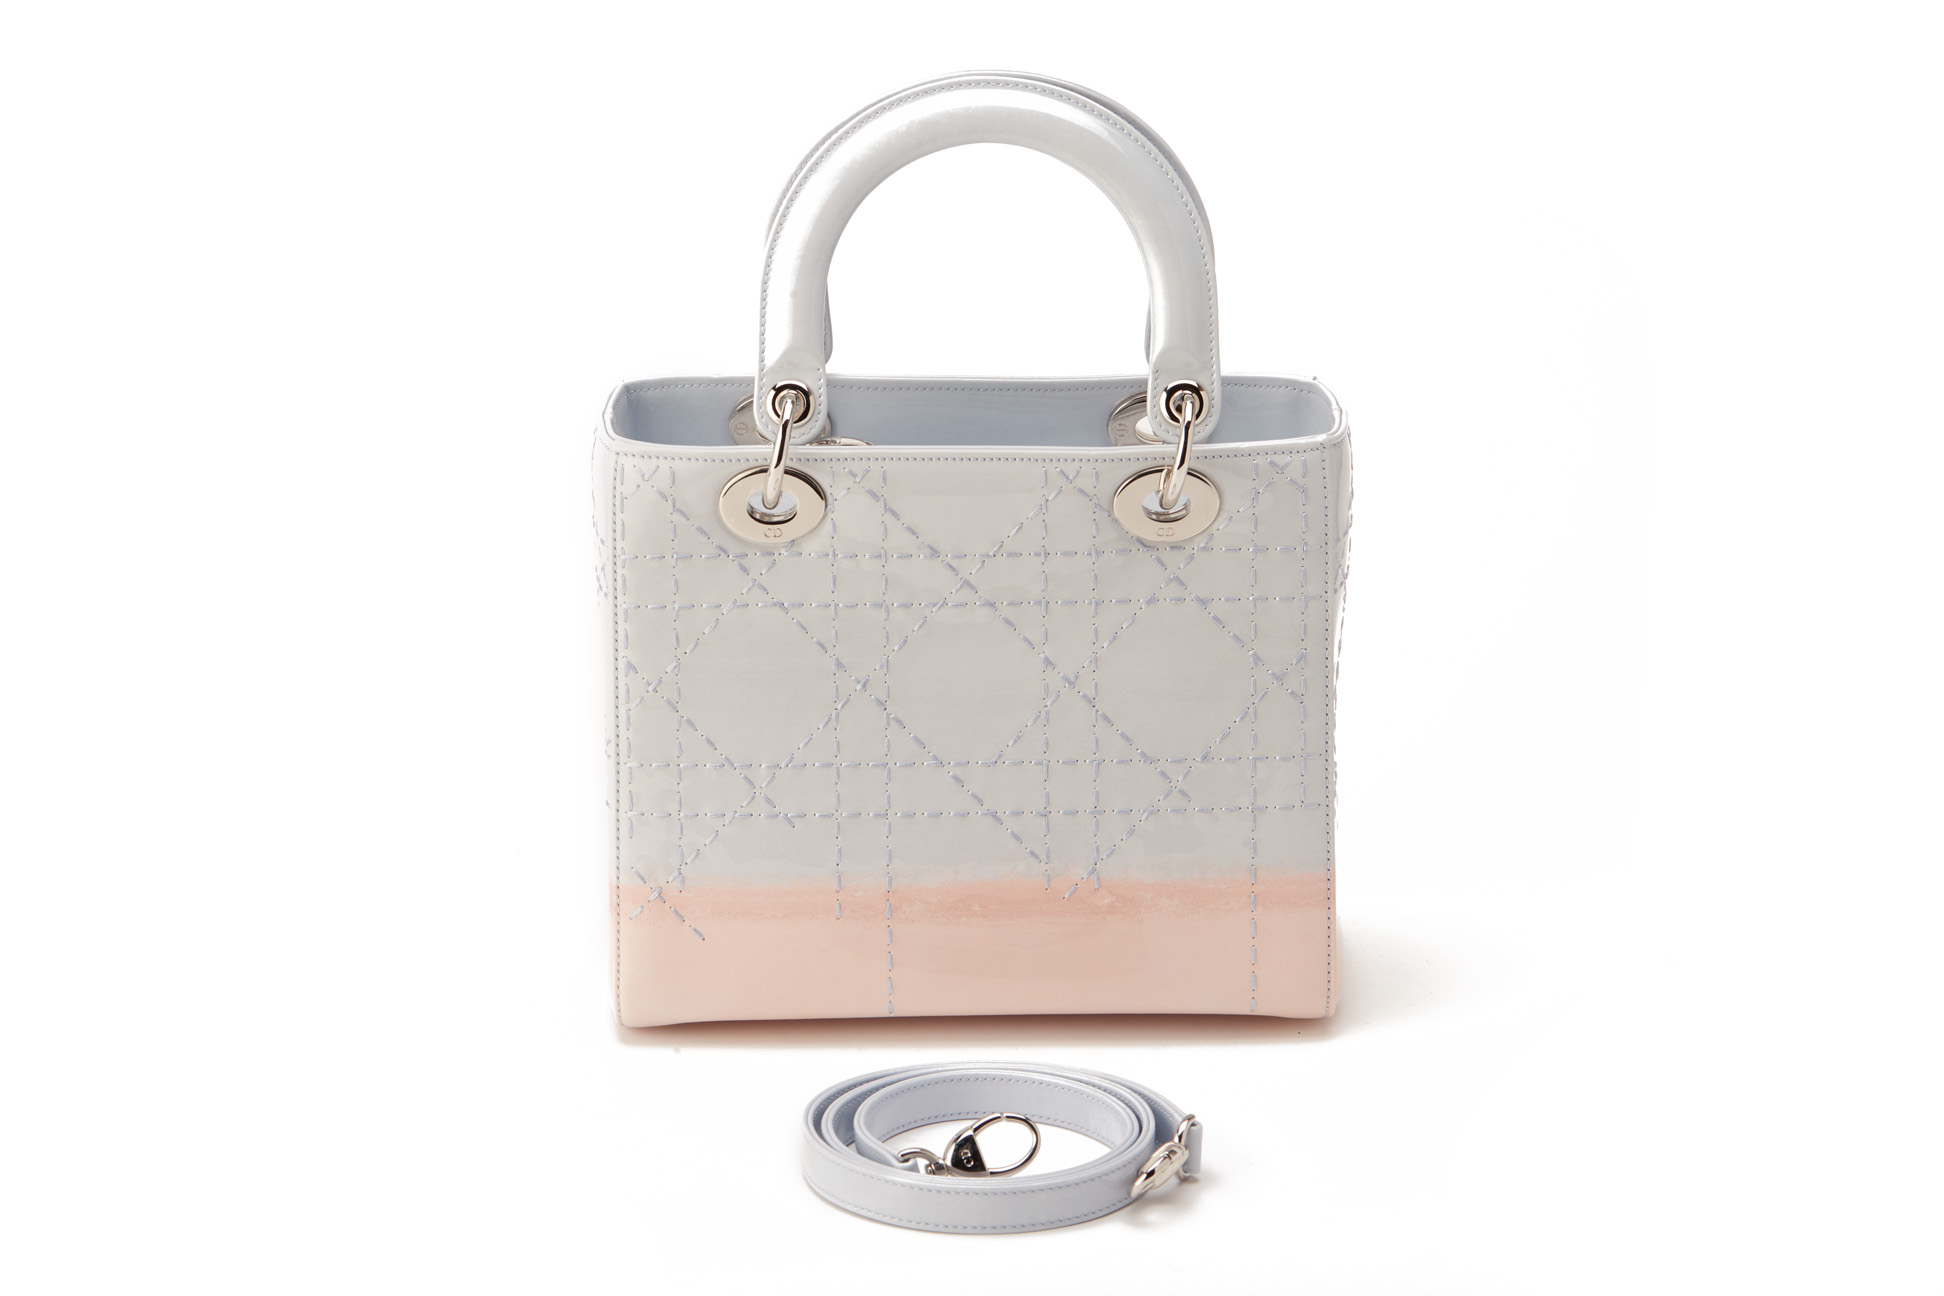 A CHRISTIAN DIOR OMBRE GREY & PINK MEDIUM LADY DIOR - Image 2 of 5